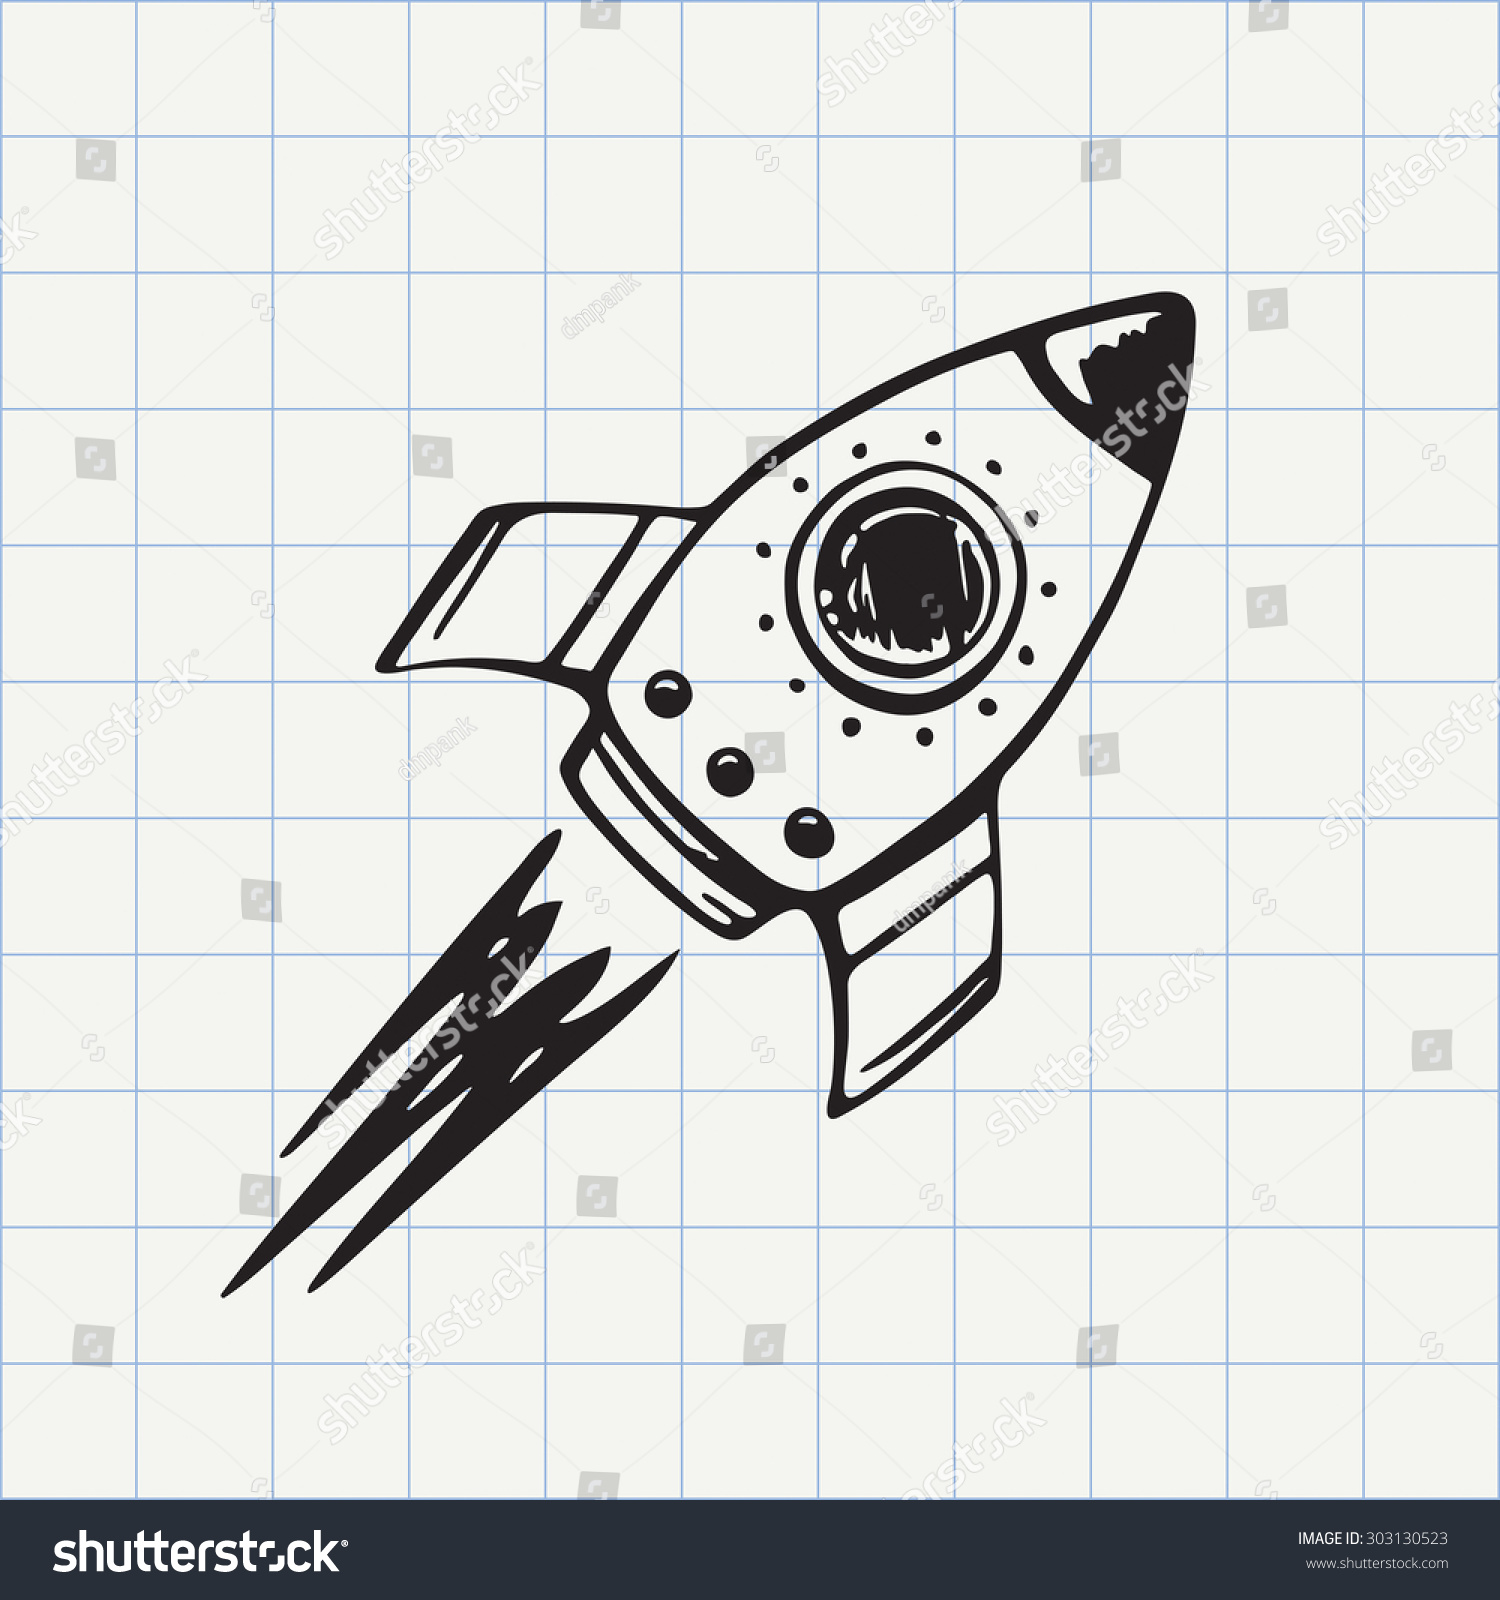  Rocket Ship Doodle Icon Hand Drawn Stock Vector 303130523 - Shutterstock